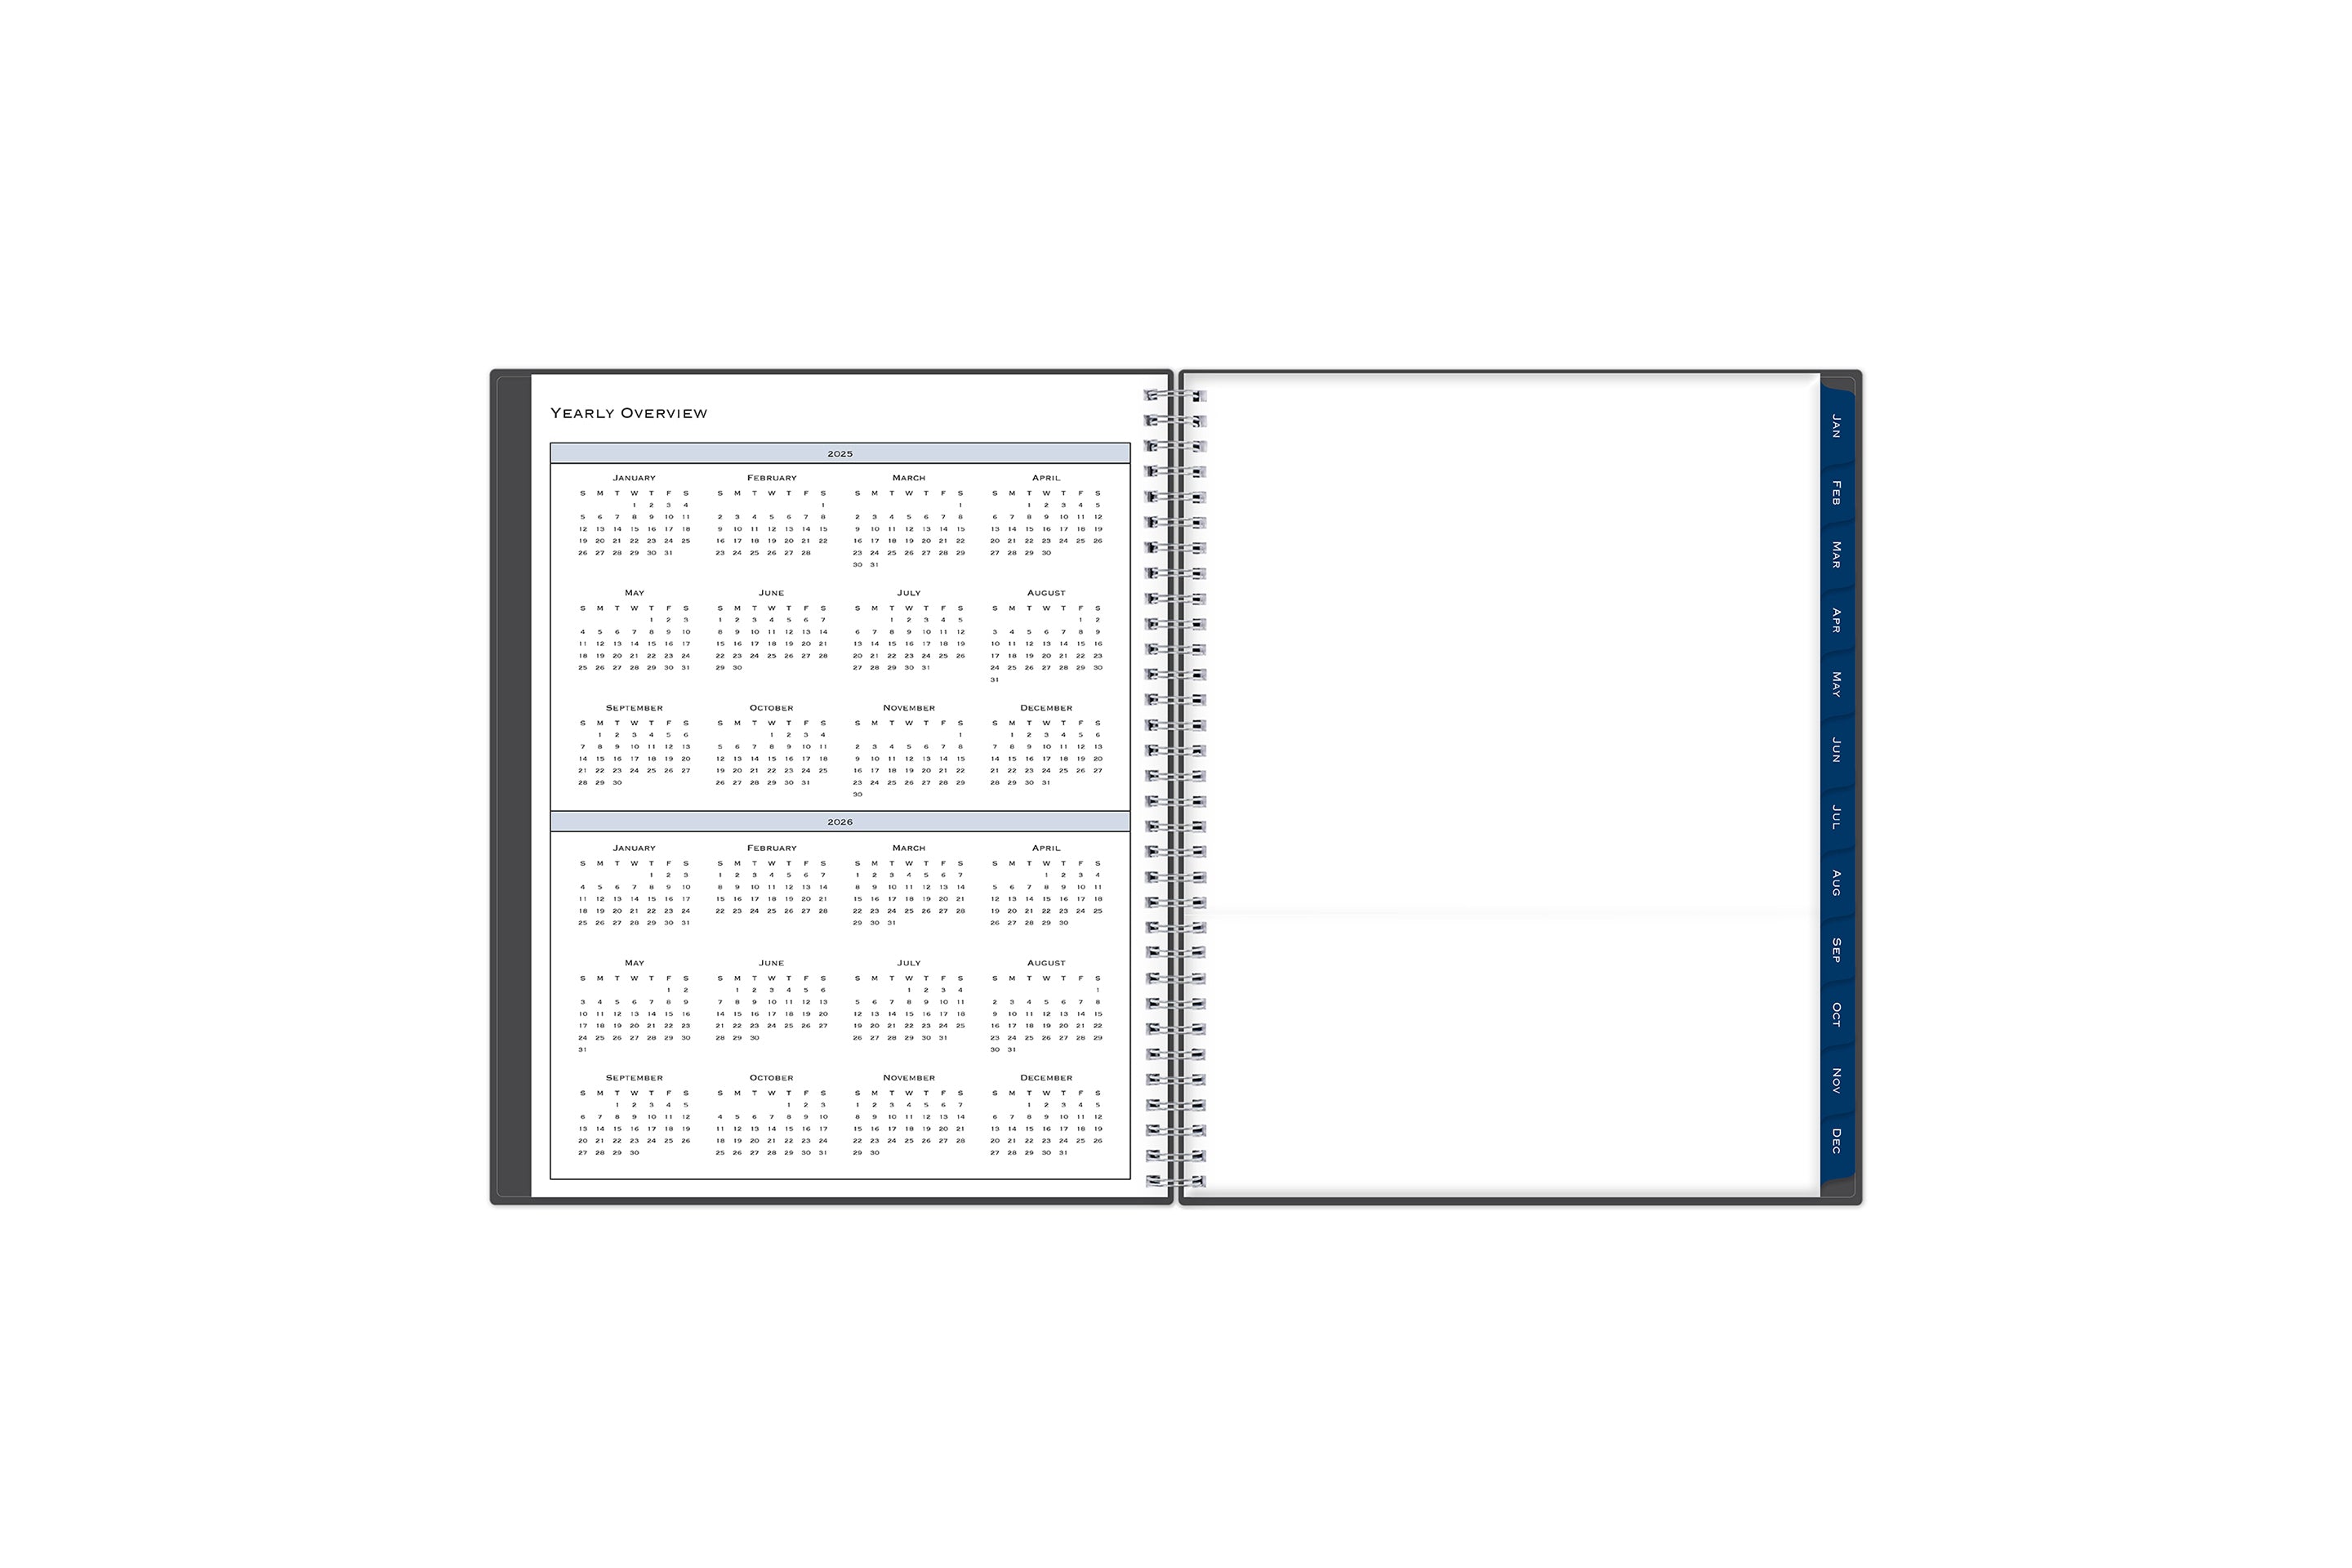 The 2025 weekly monthly appointment book features yearly overview for both 2025, 2026 alongside a year end goals list and ownership page.